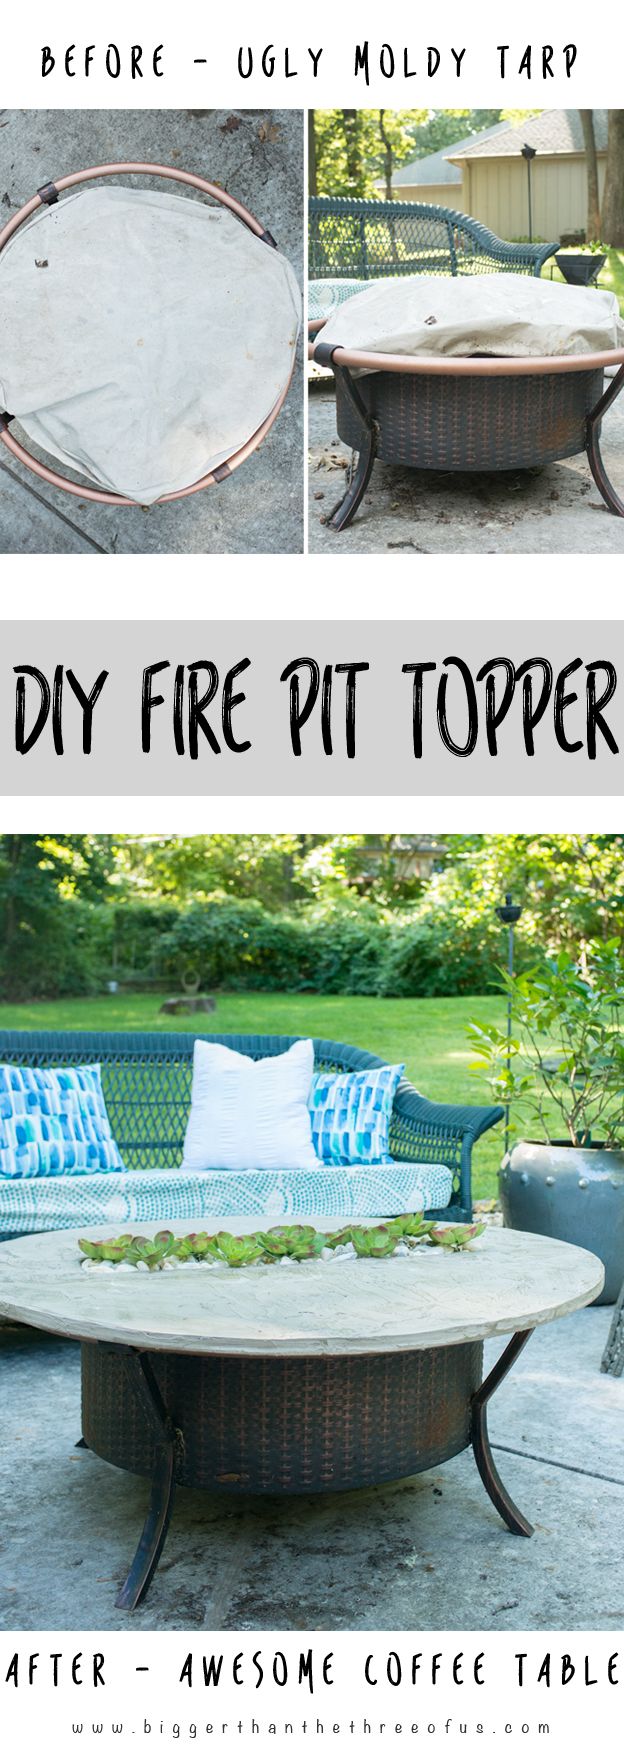 How to Make a Fire Pit Topper